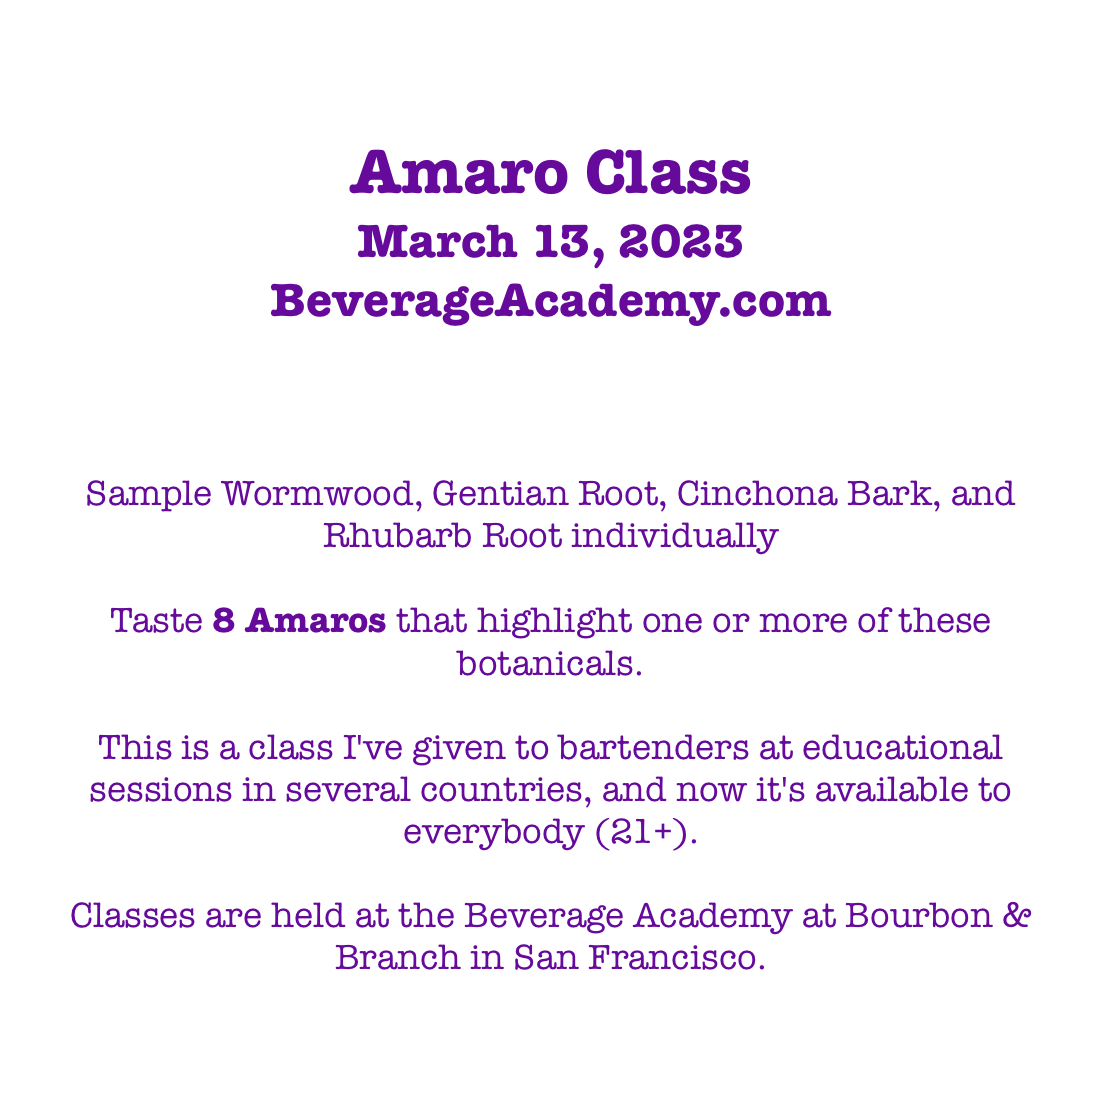 Amaro class in San Francisco on March 13 with me: beverageacademy.com/new-events/202…